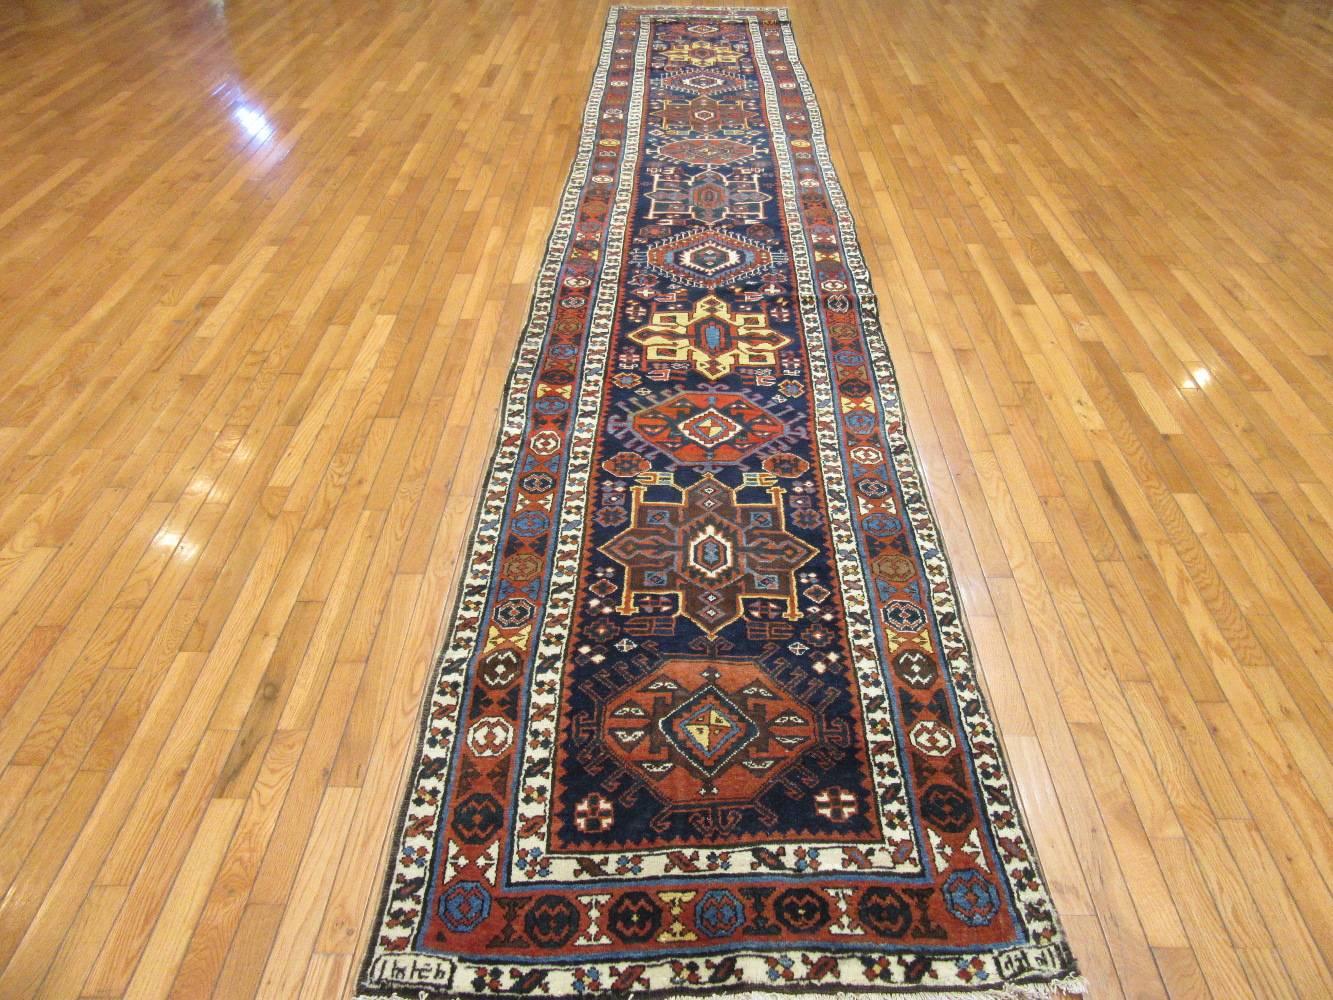 This is a long genuine hand-knotted antique Persian Heriz runner rug. It has an inscription on the corners of one end indicating it was made in 1923. The rug has a simple geometric pattern on a navy blue background and rusty red border. It measures